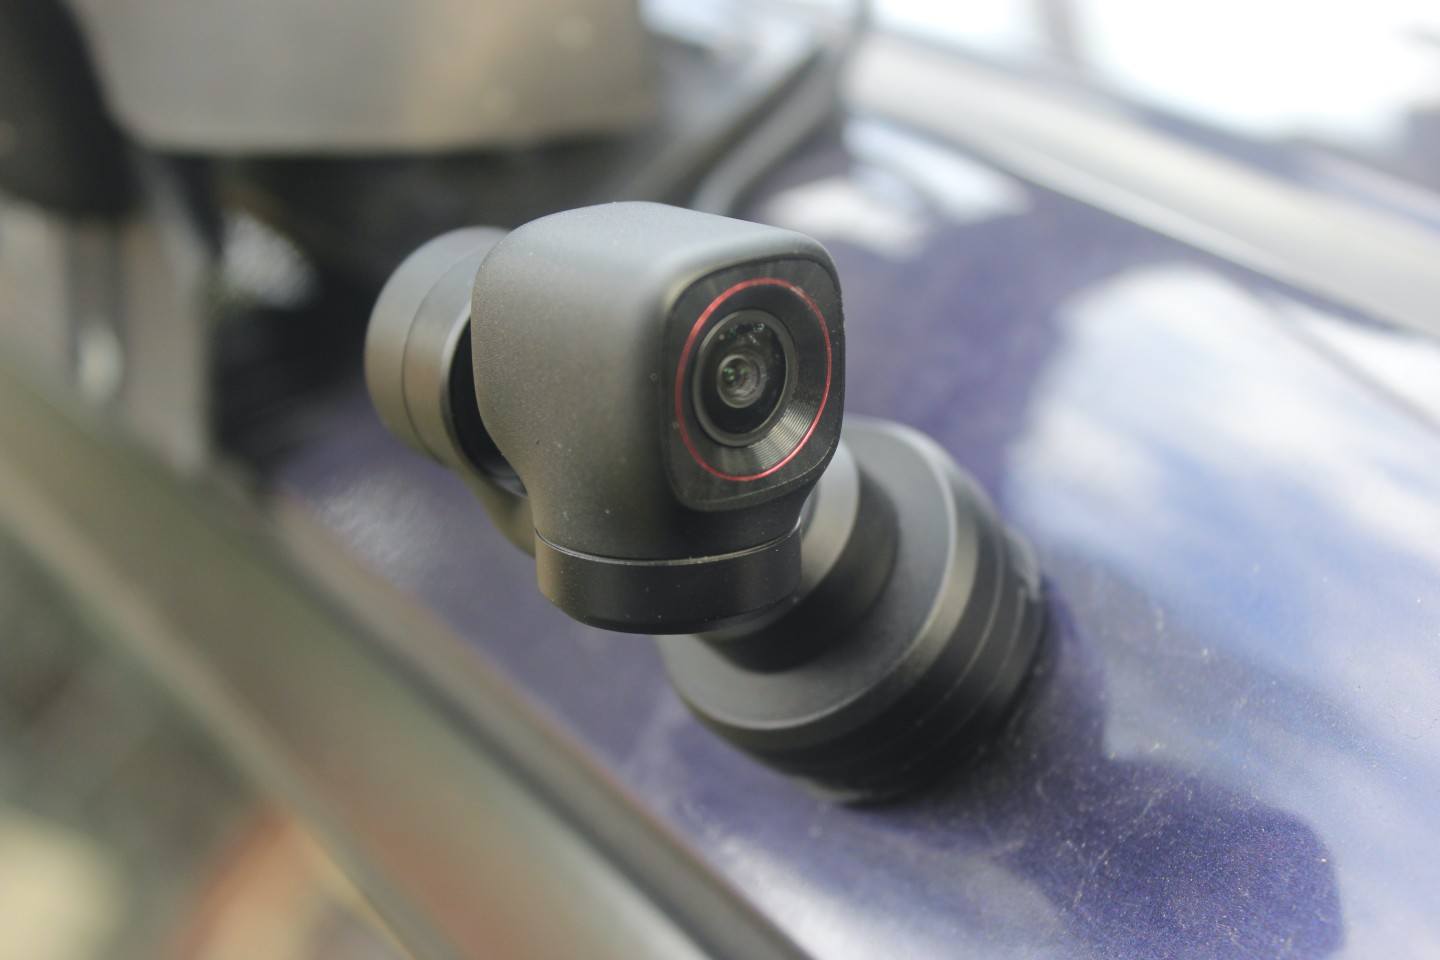 Because the camera/gimbal unit is magnetic (as is the handle), it can be mounted directly onto metallic surfaces